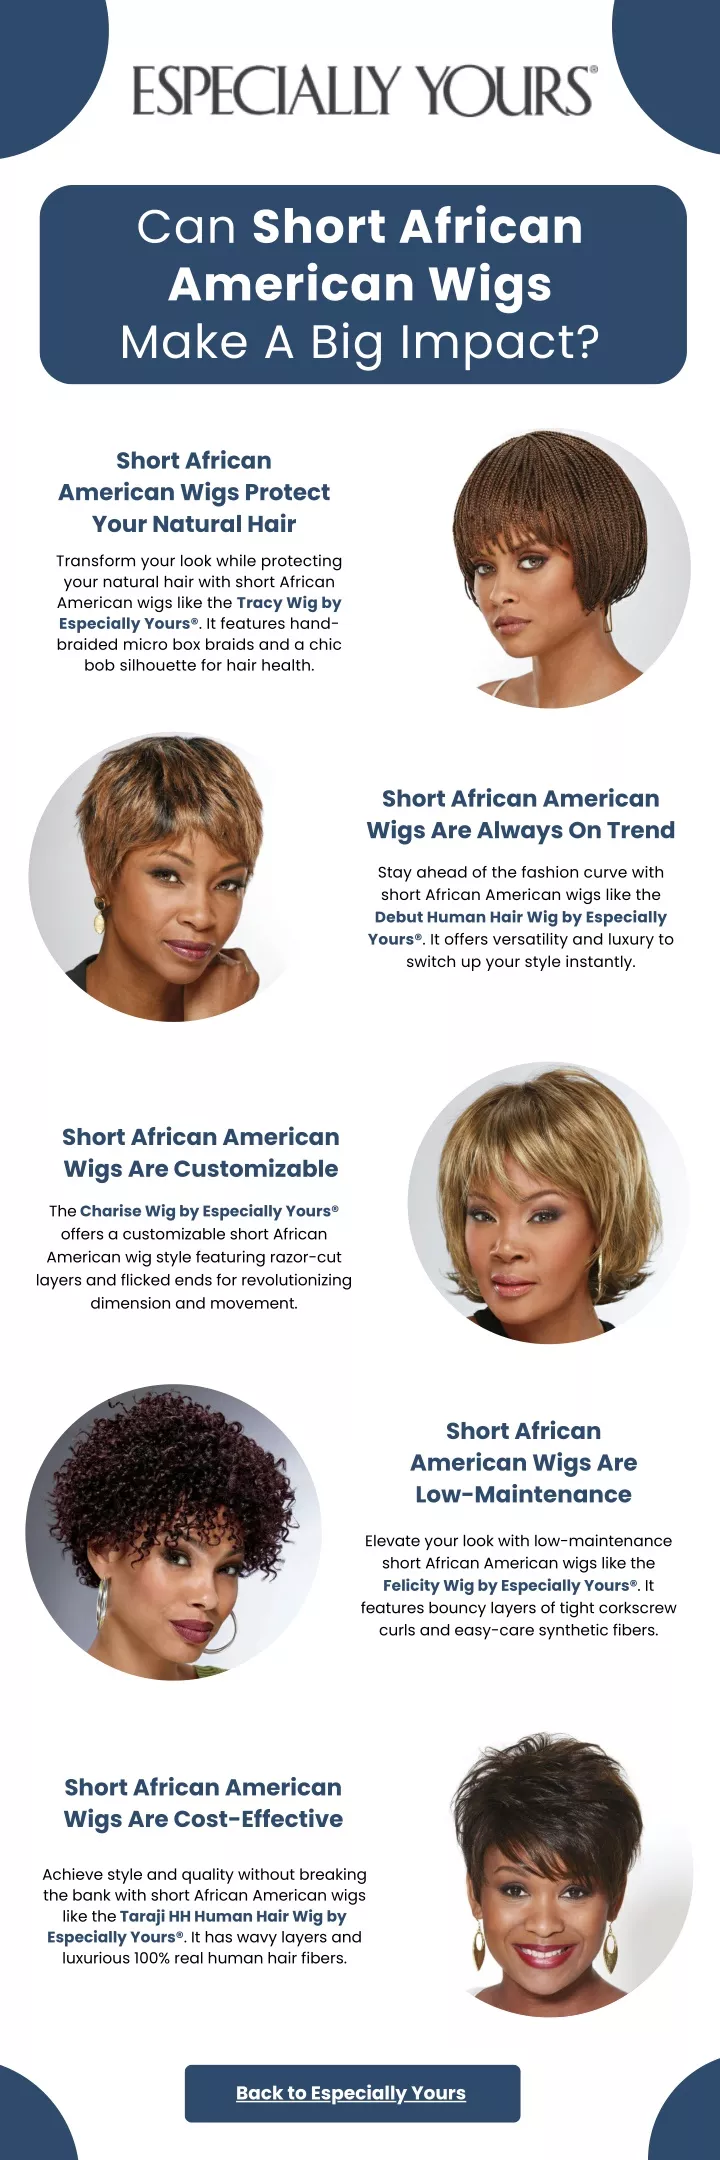 can short african american wigs make a big impact